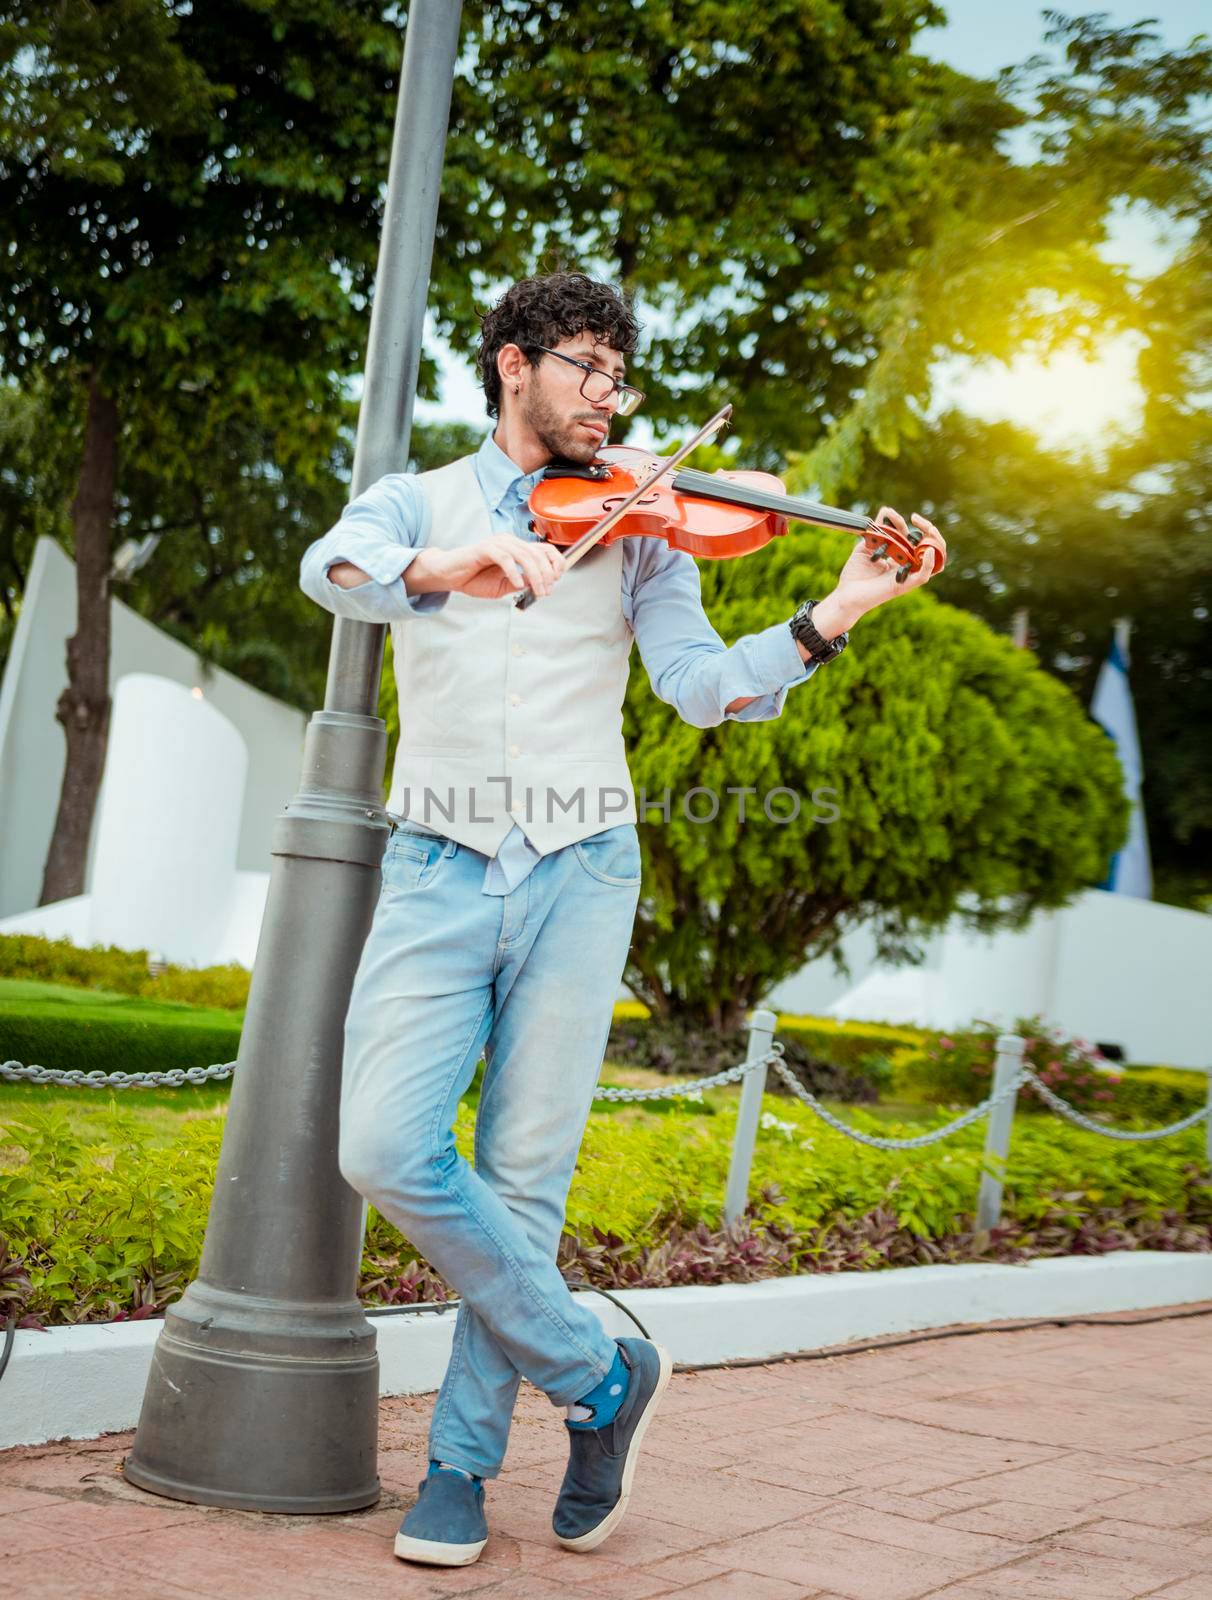 Man playing violin in the street. Portrait of man playing violin in the street. Jacket artist playing violin outdoors, Image of a person playing violin outdoors